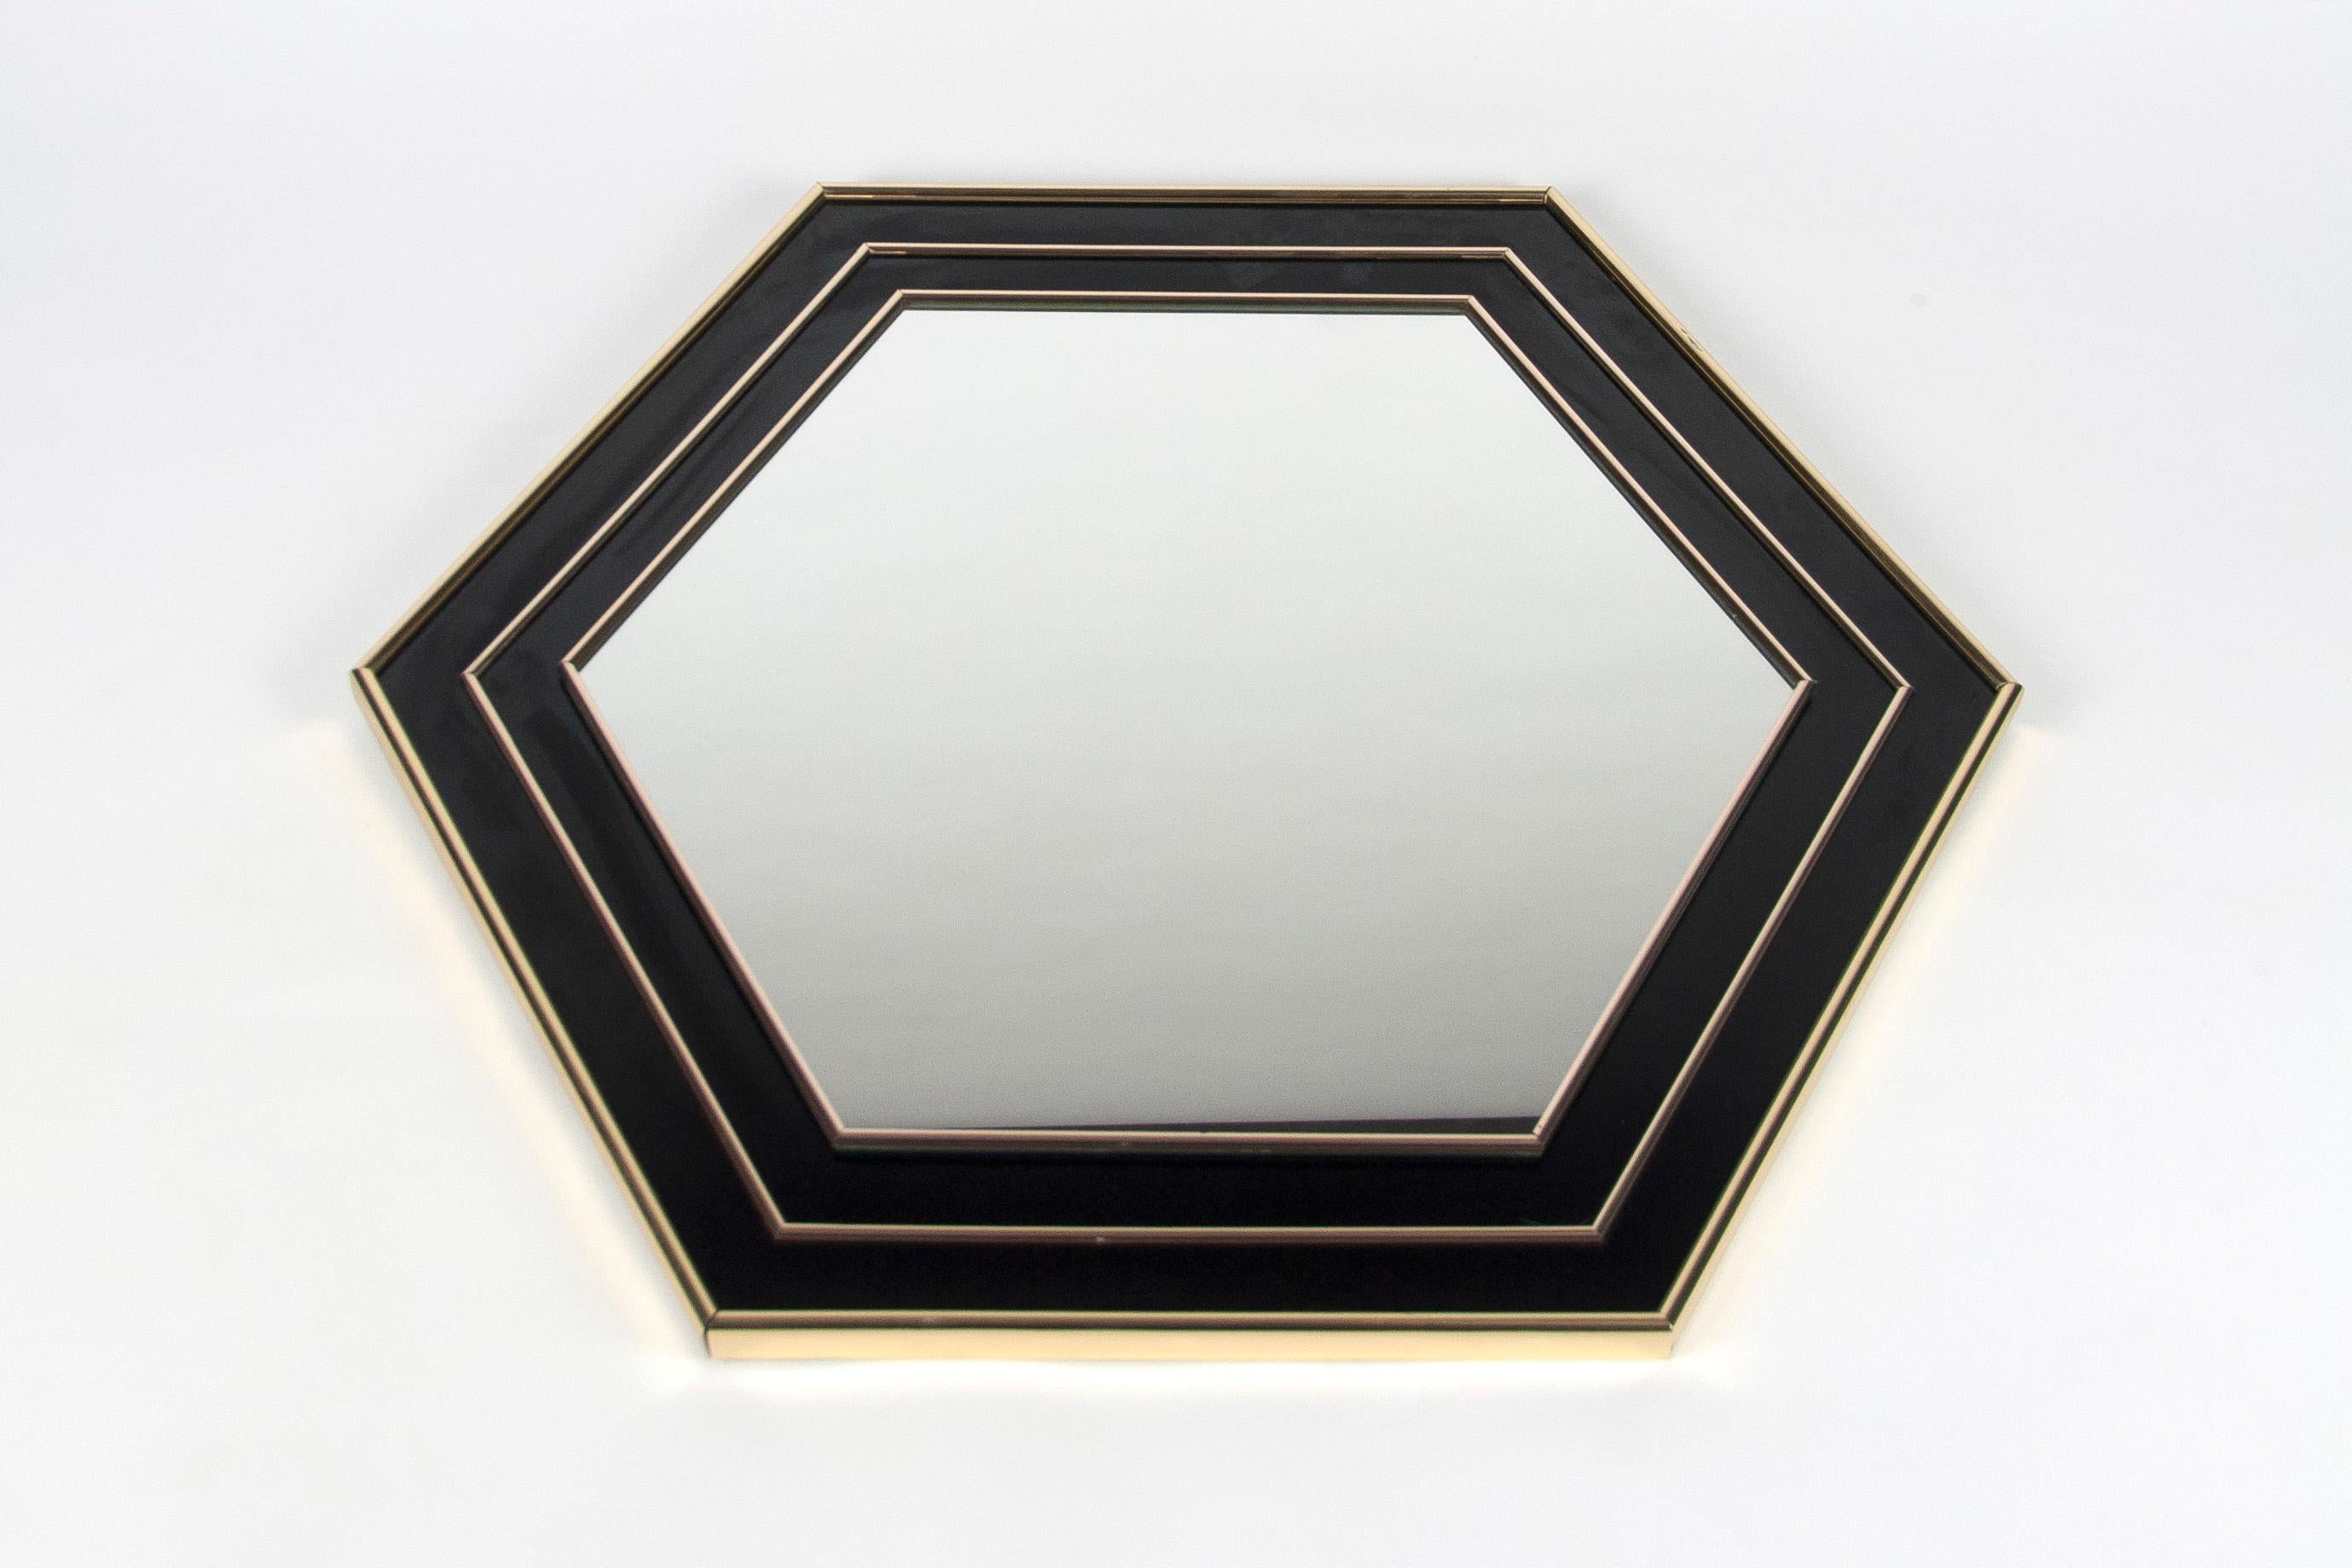 Superb vintage hexagonal mirror in black lacquer and brass, attributed to Jean Claude Mahey. Very good quality of manufacture, quality finishes.